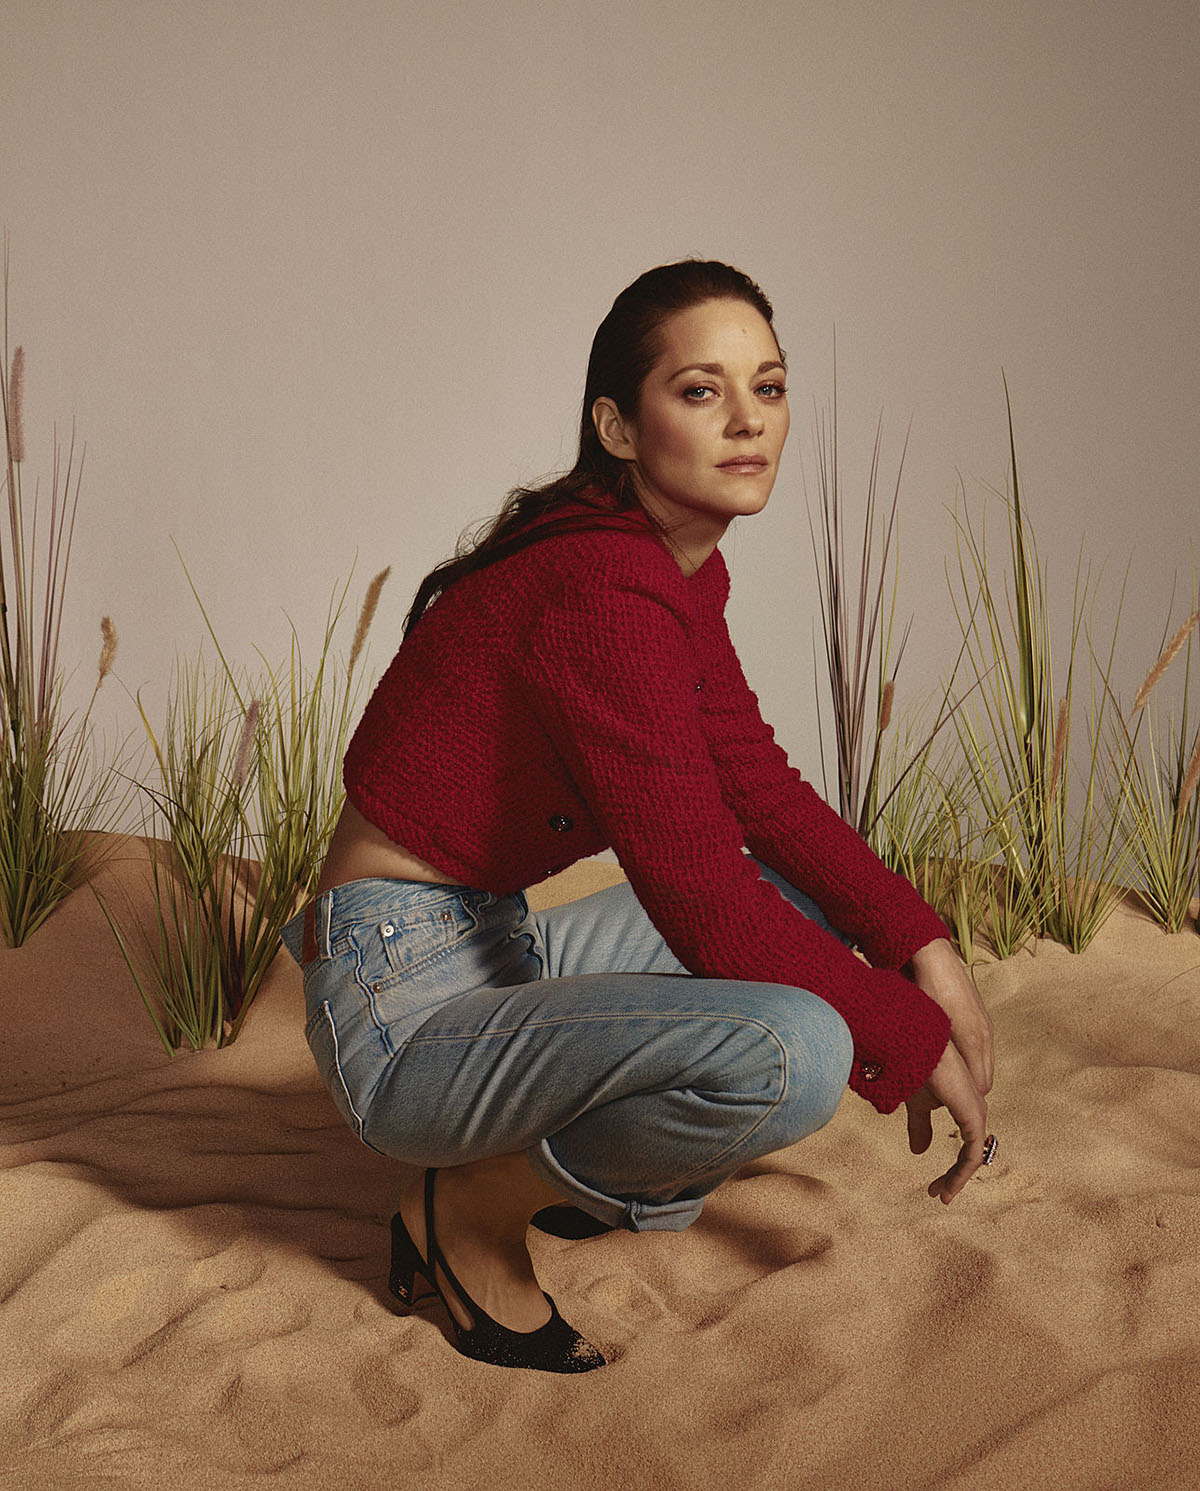 Marion Cotillard covers Marie Claire France July 2021 by Van Mossevelde + N